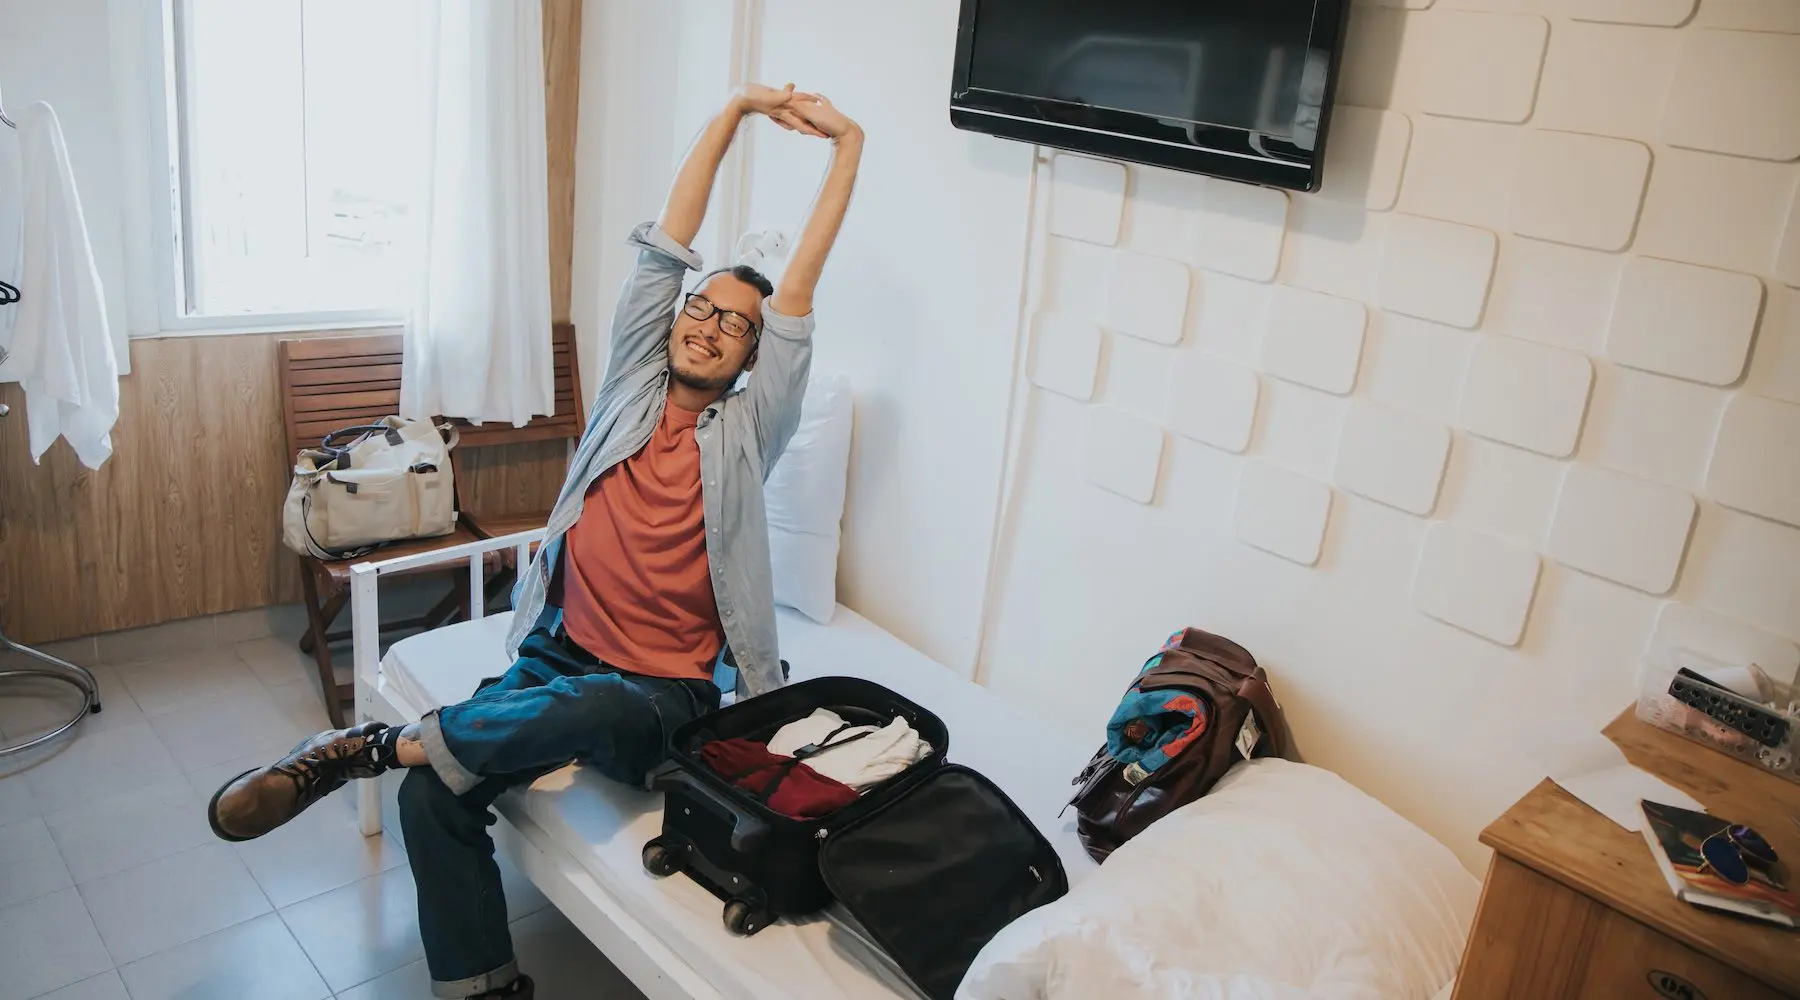 A smiling traveller stretching on a bed with a suitcase nearby.